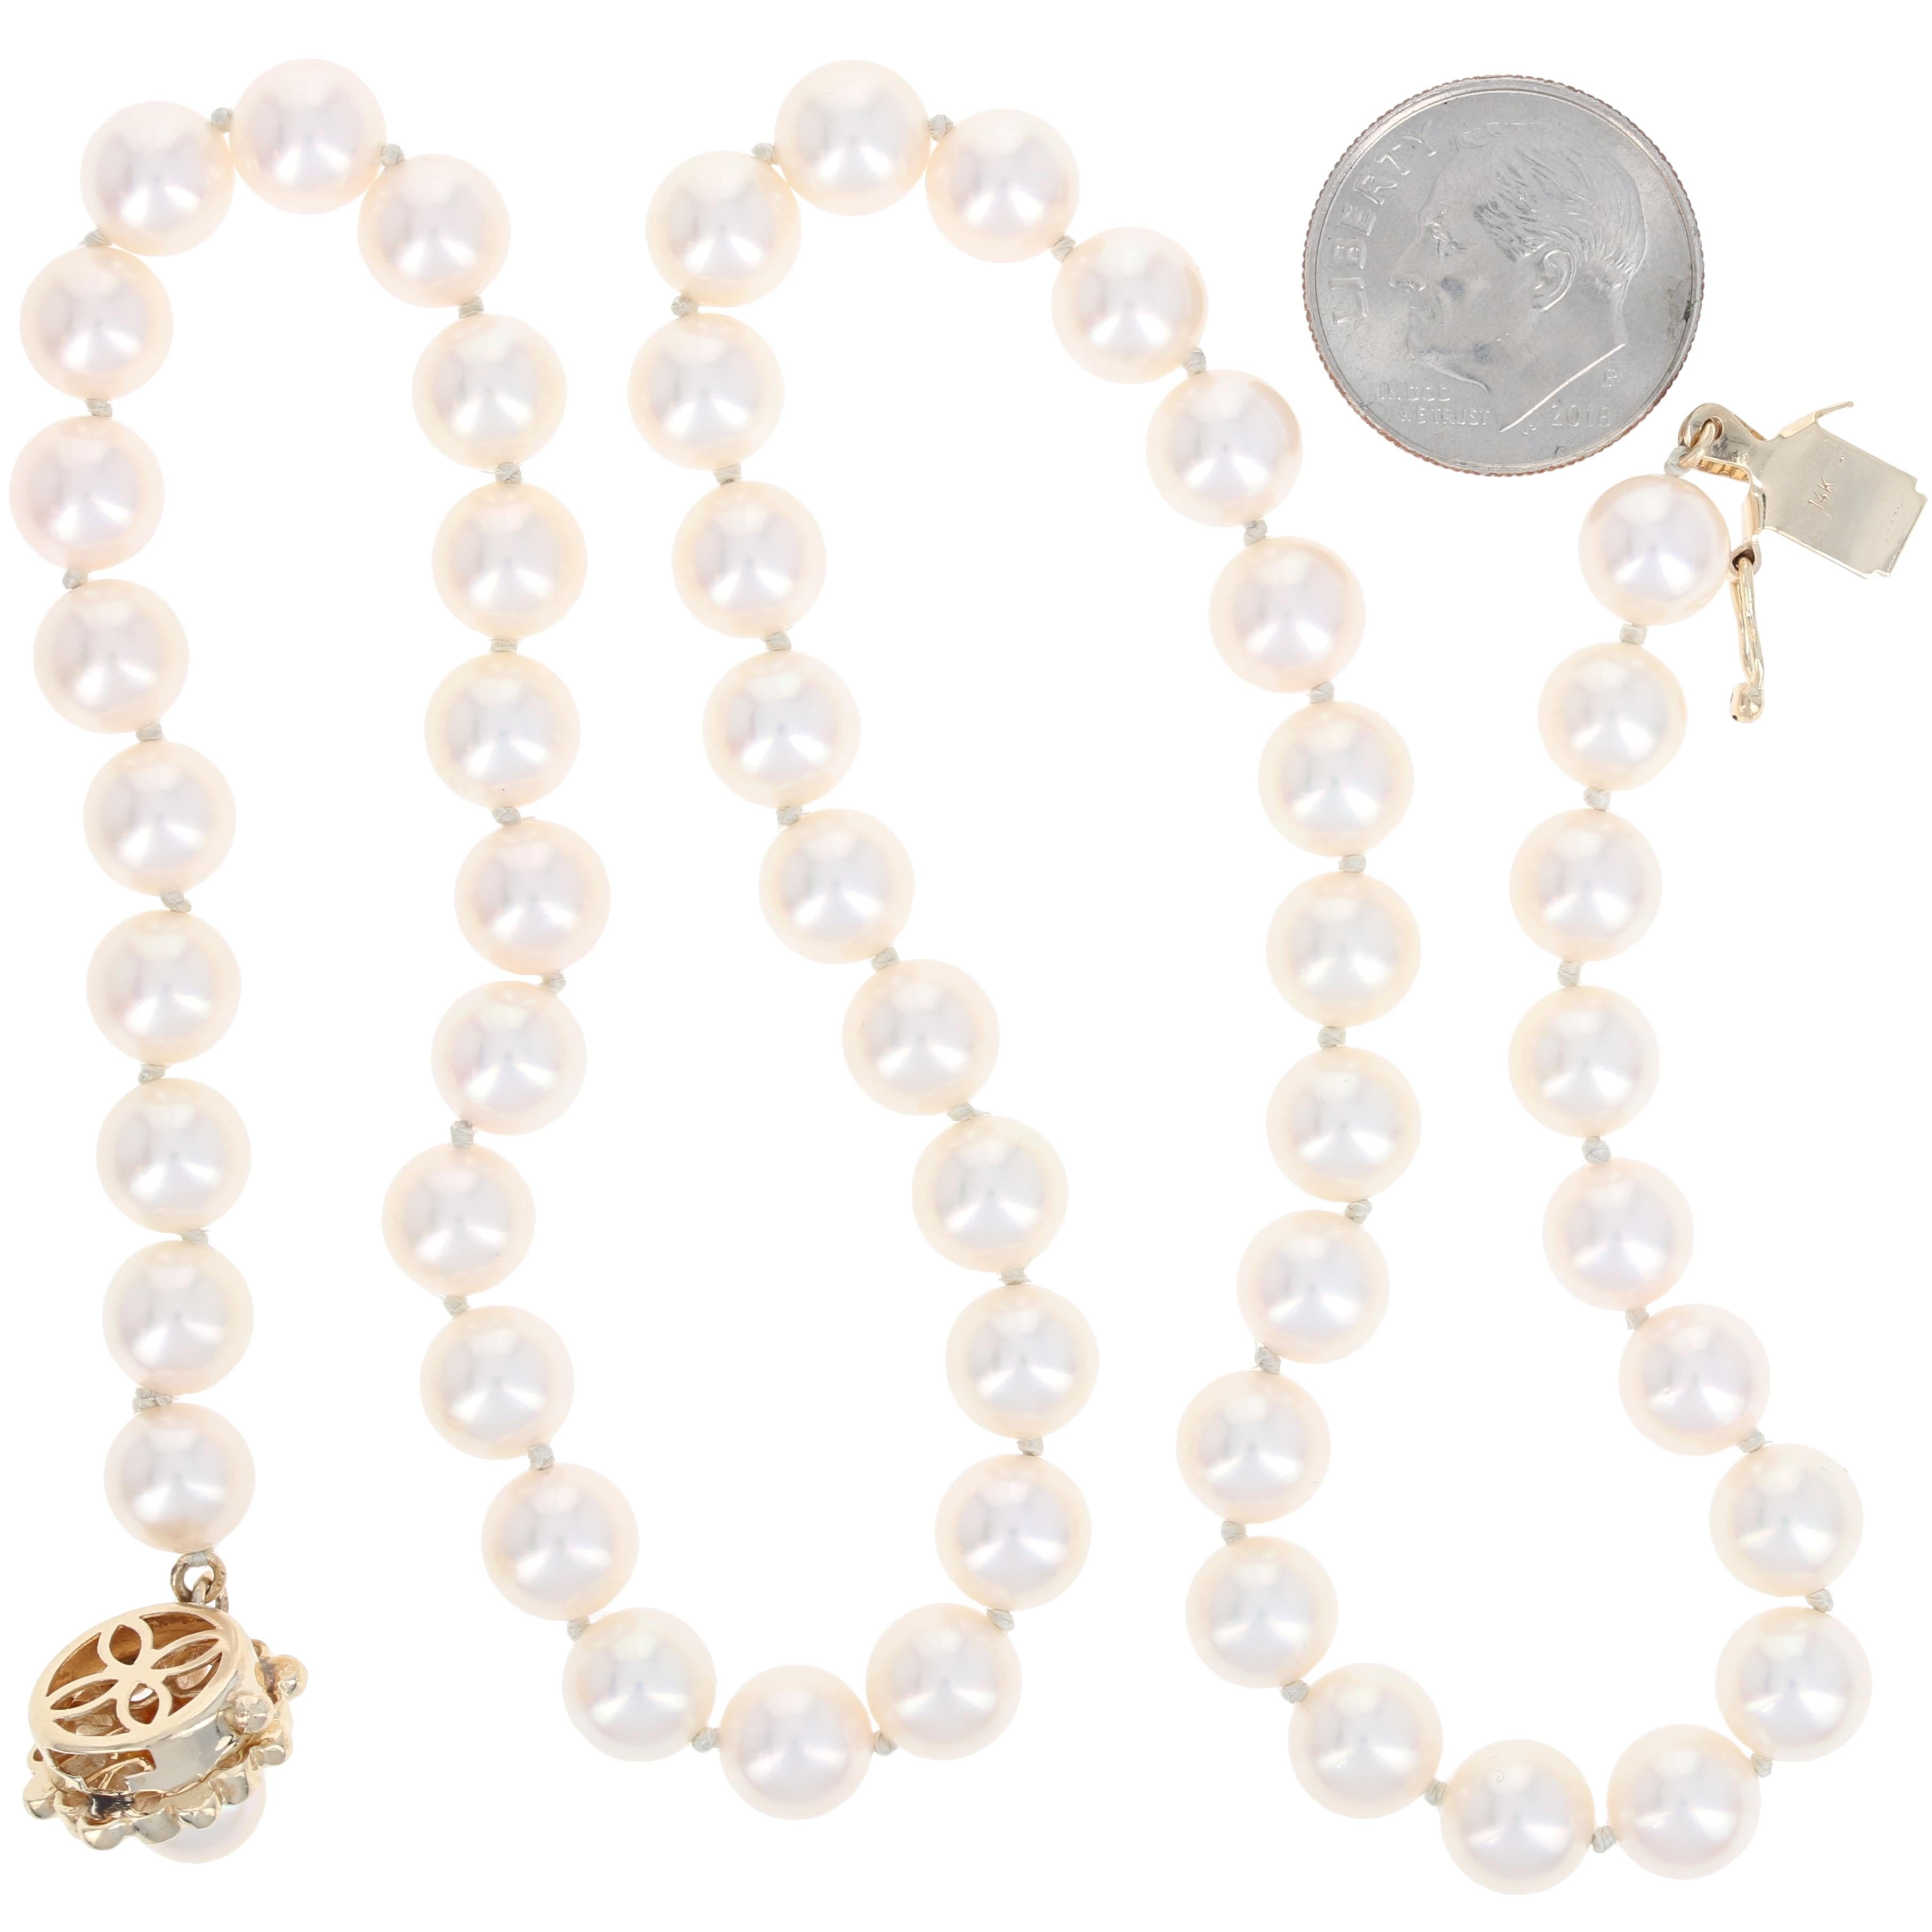 Women's Akoya Pearl Necklace, 14k Yellow Gold Clasp Single Knotted Strand